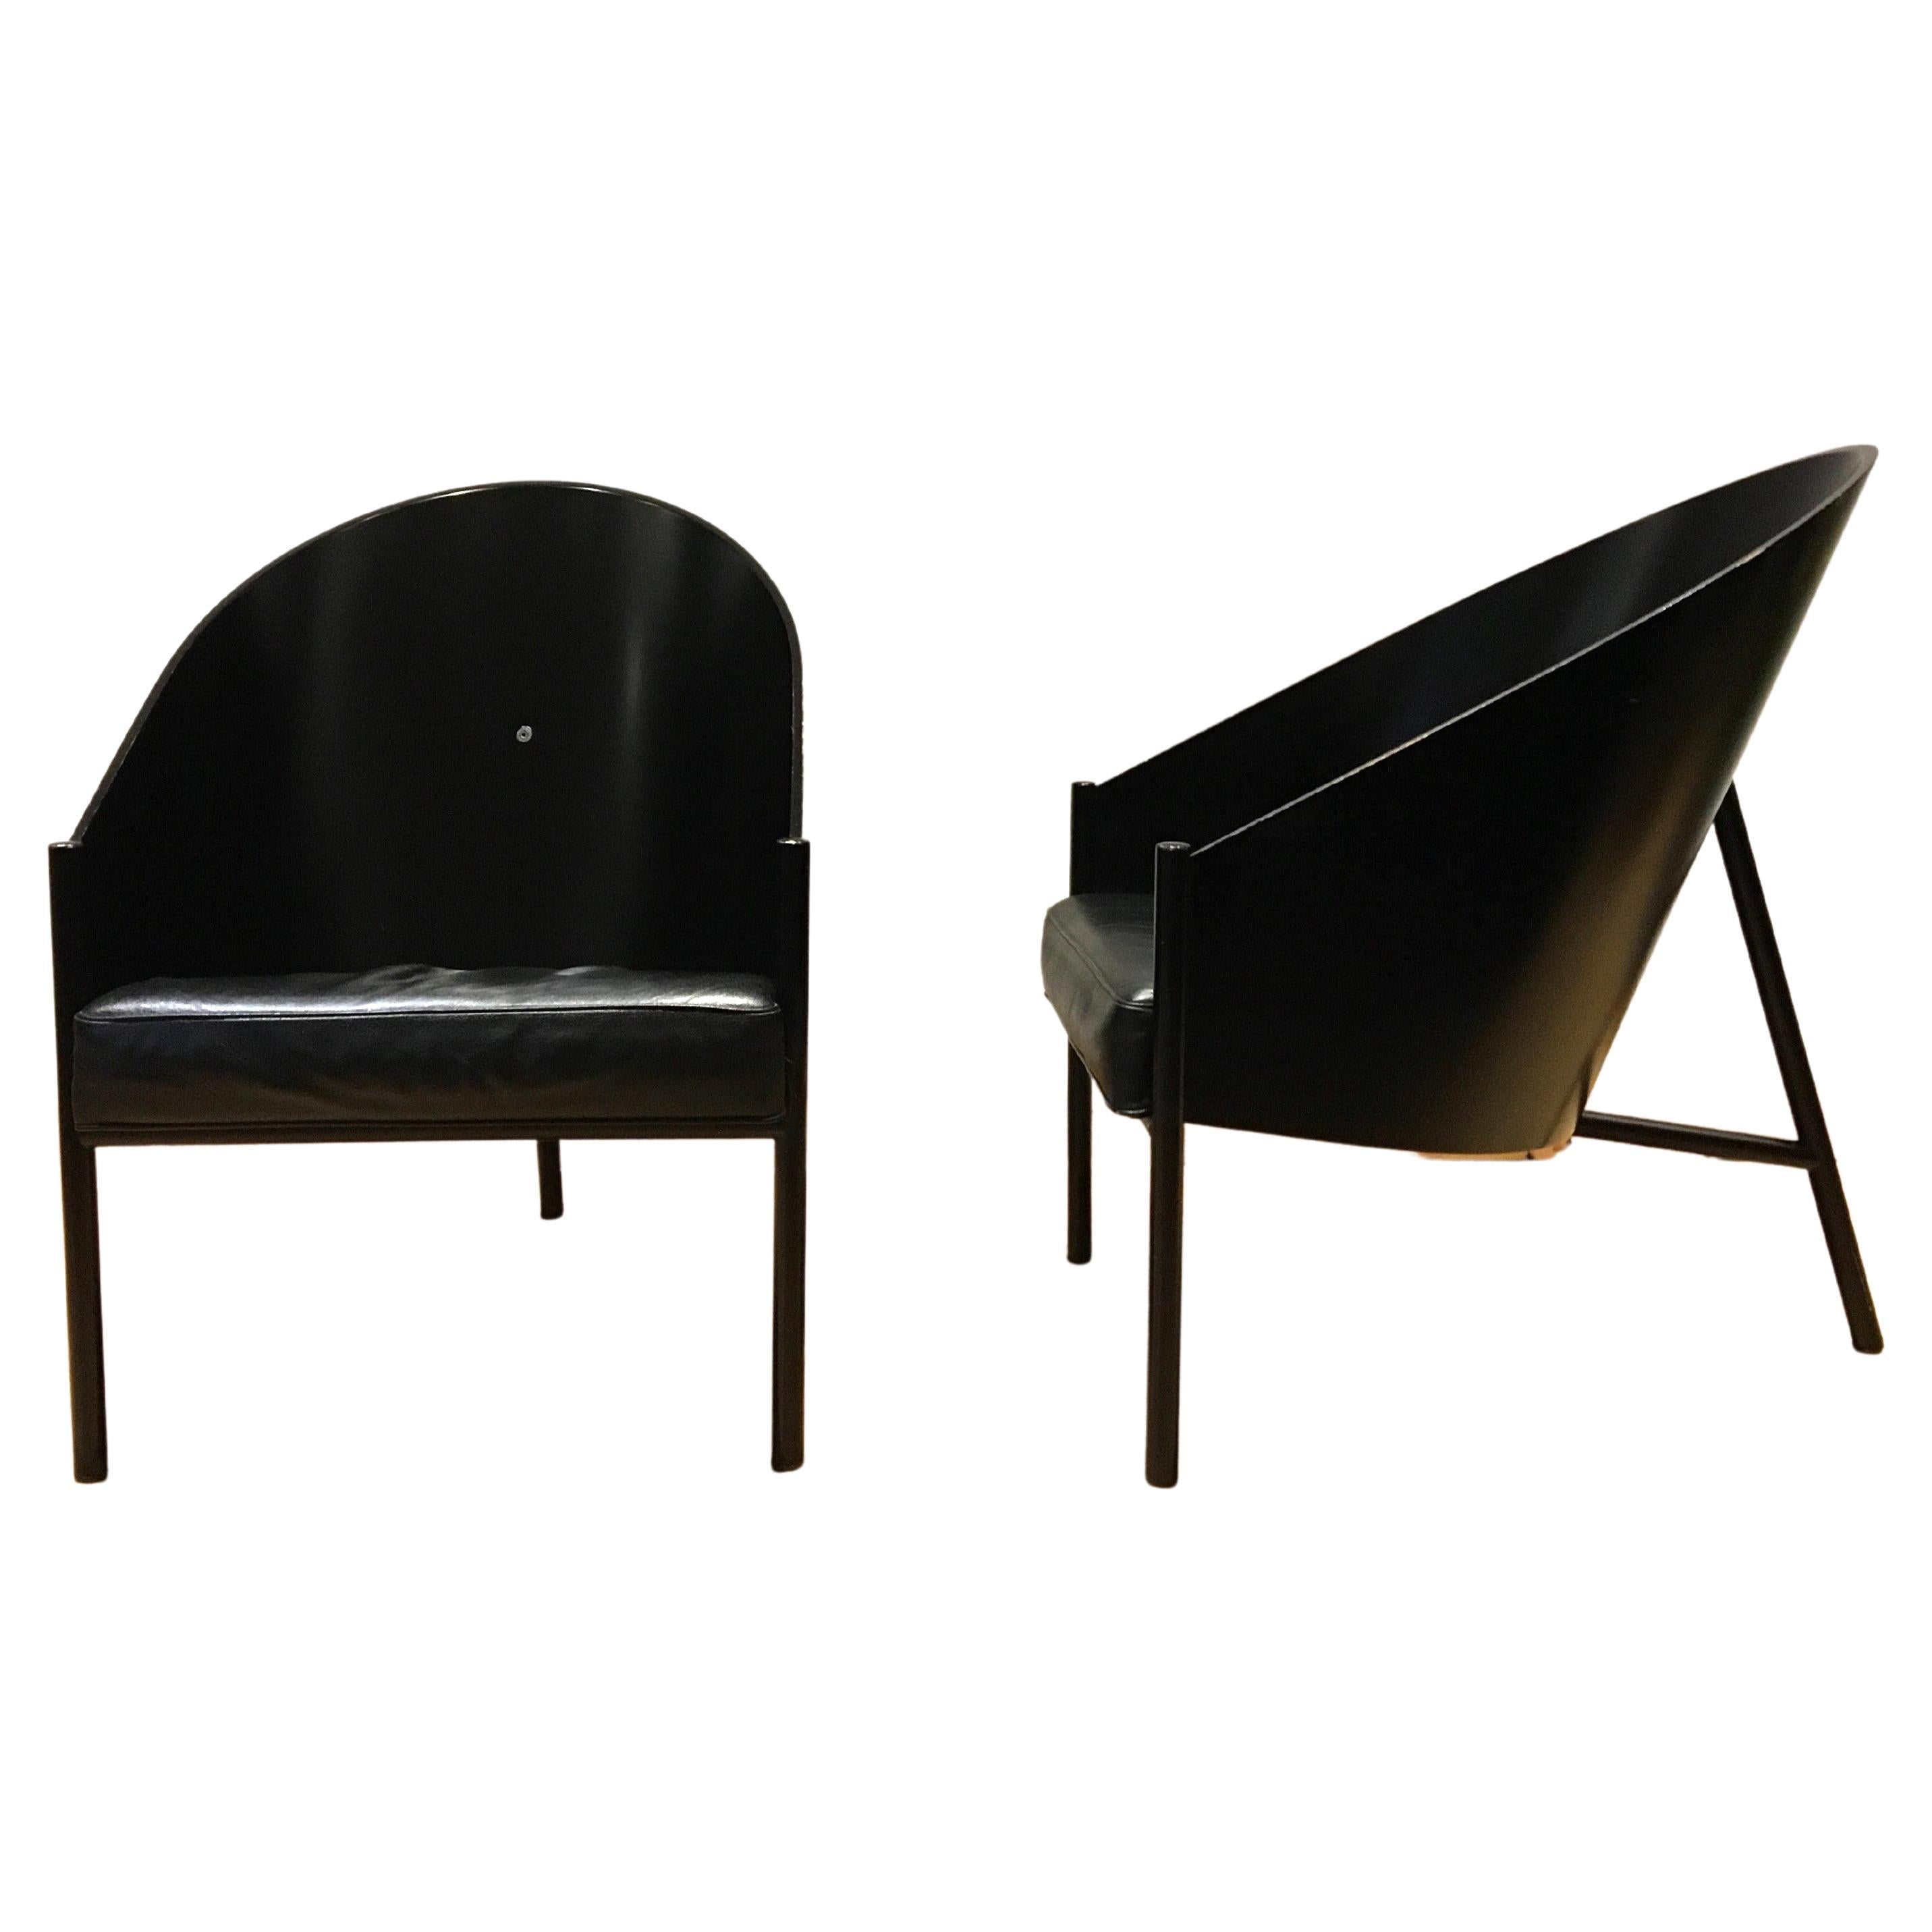 Pair of Pratfall Philippe Starck Lounge Chairs, Driade Aleph, Italy For Sale